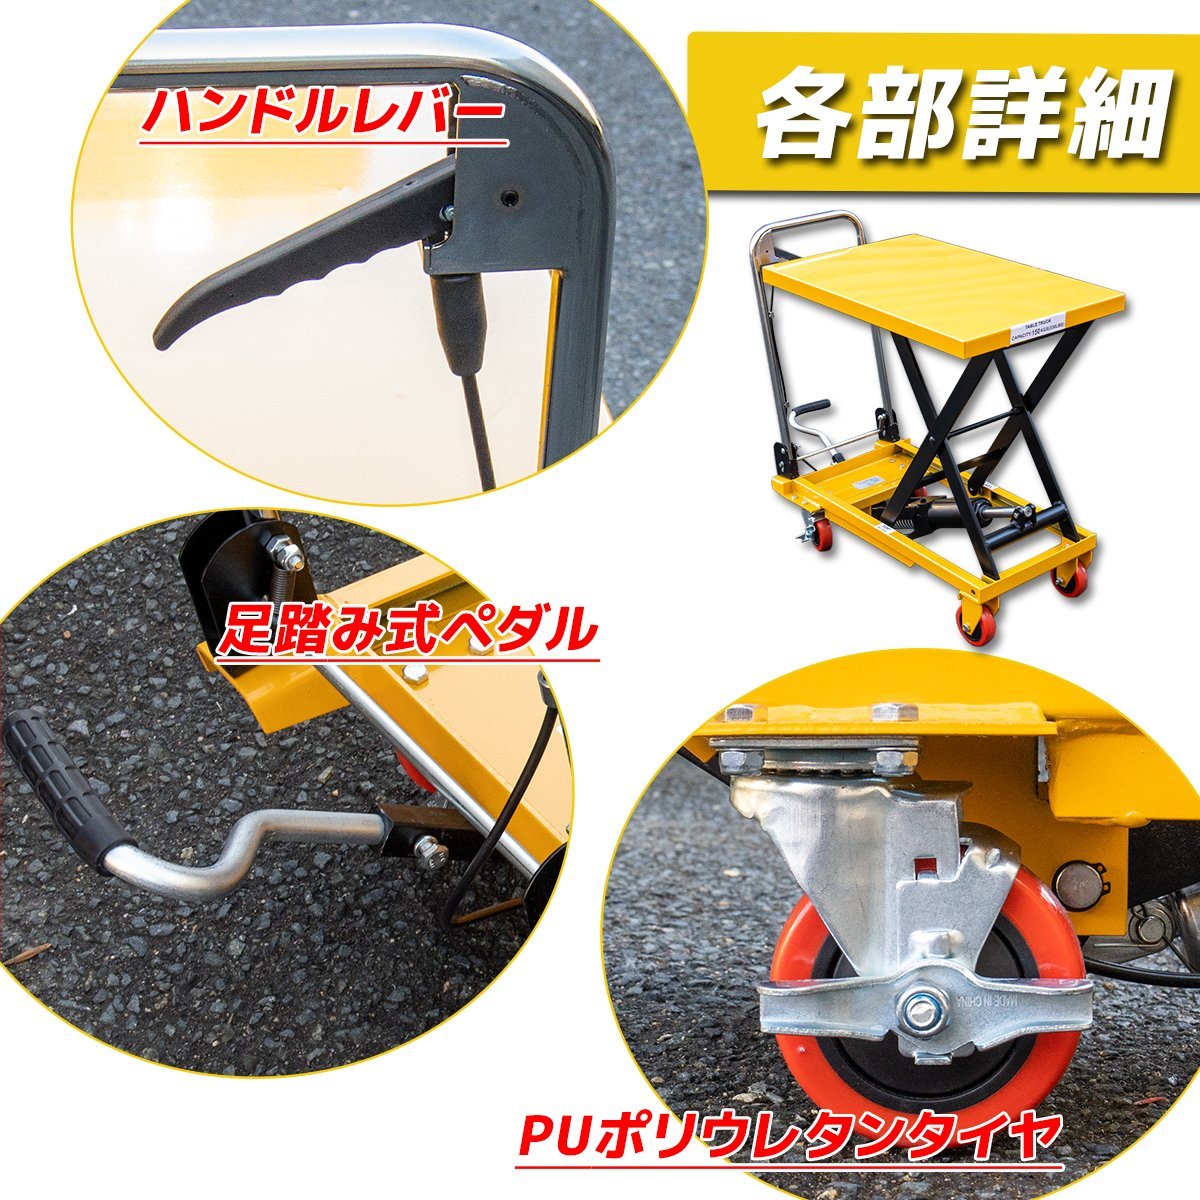 # free shipping # neat storage * folding type * hand table lift hydraulic type going up and down push car stepping lifter withstand load 150KG